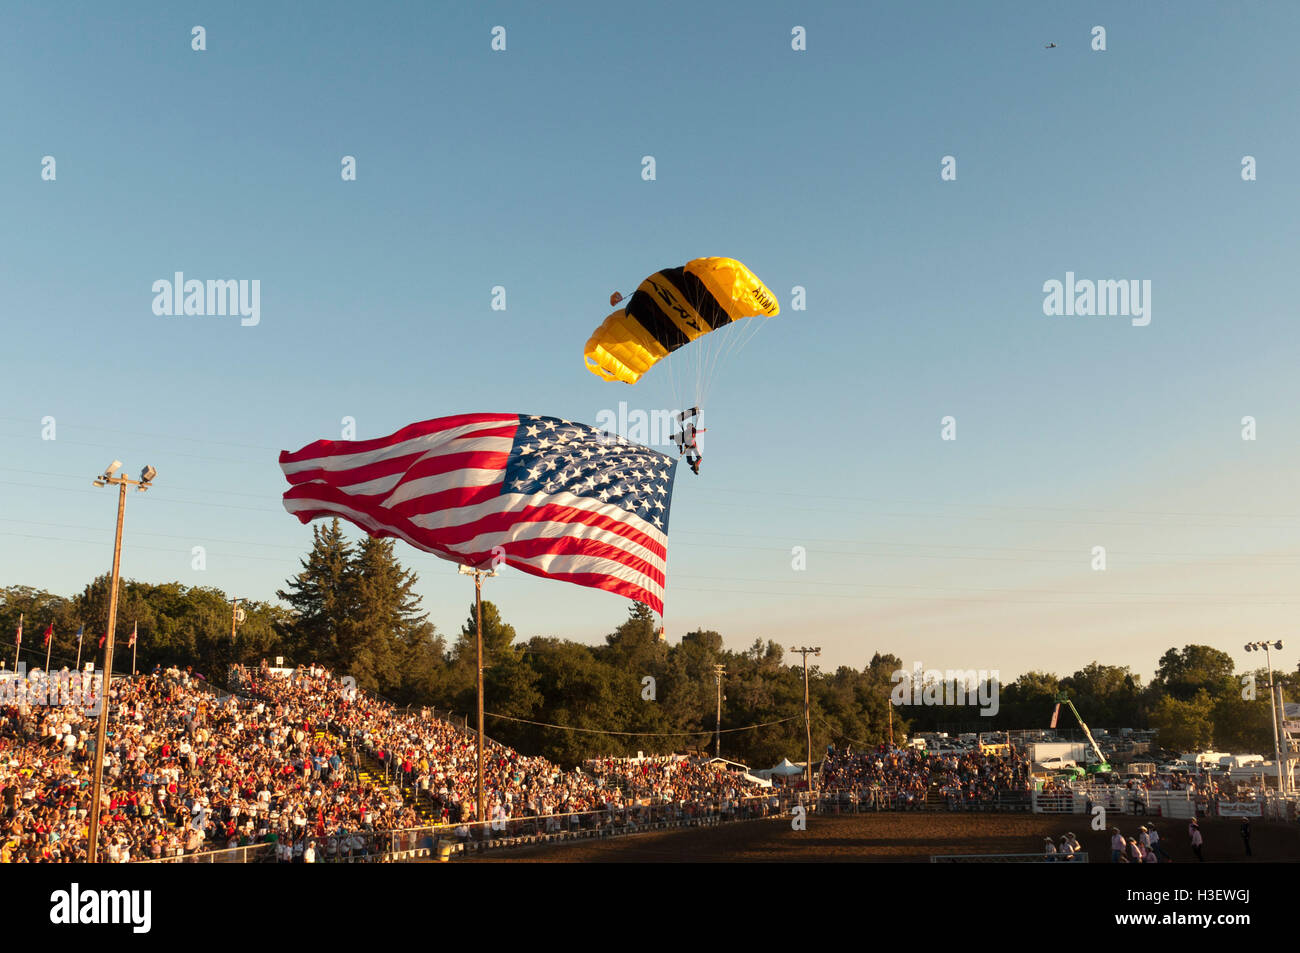 FOLSOM, CA, USA - JULY 4, 2010: US Army Skydiver landing with US flag at Folsom rodeo Stock Photo